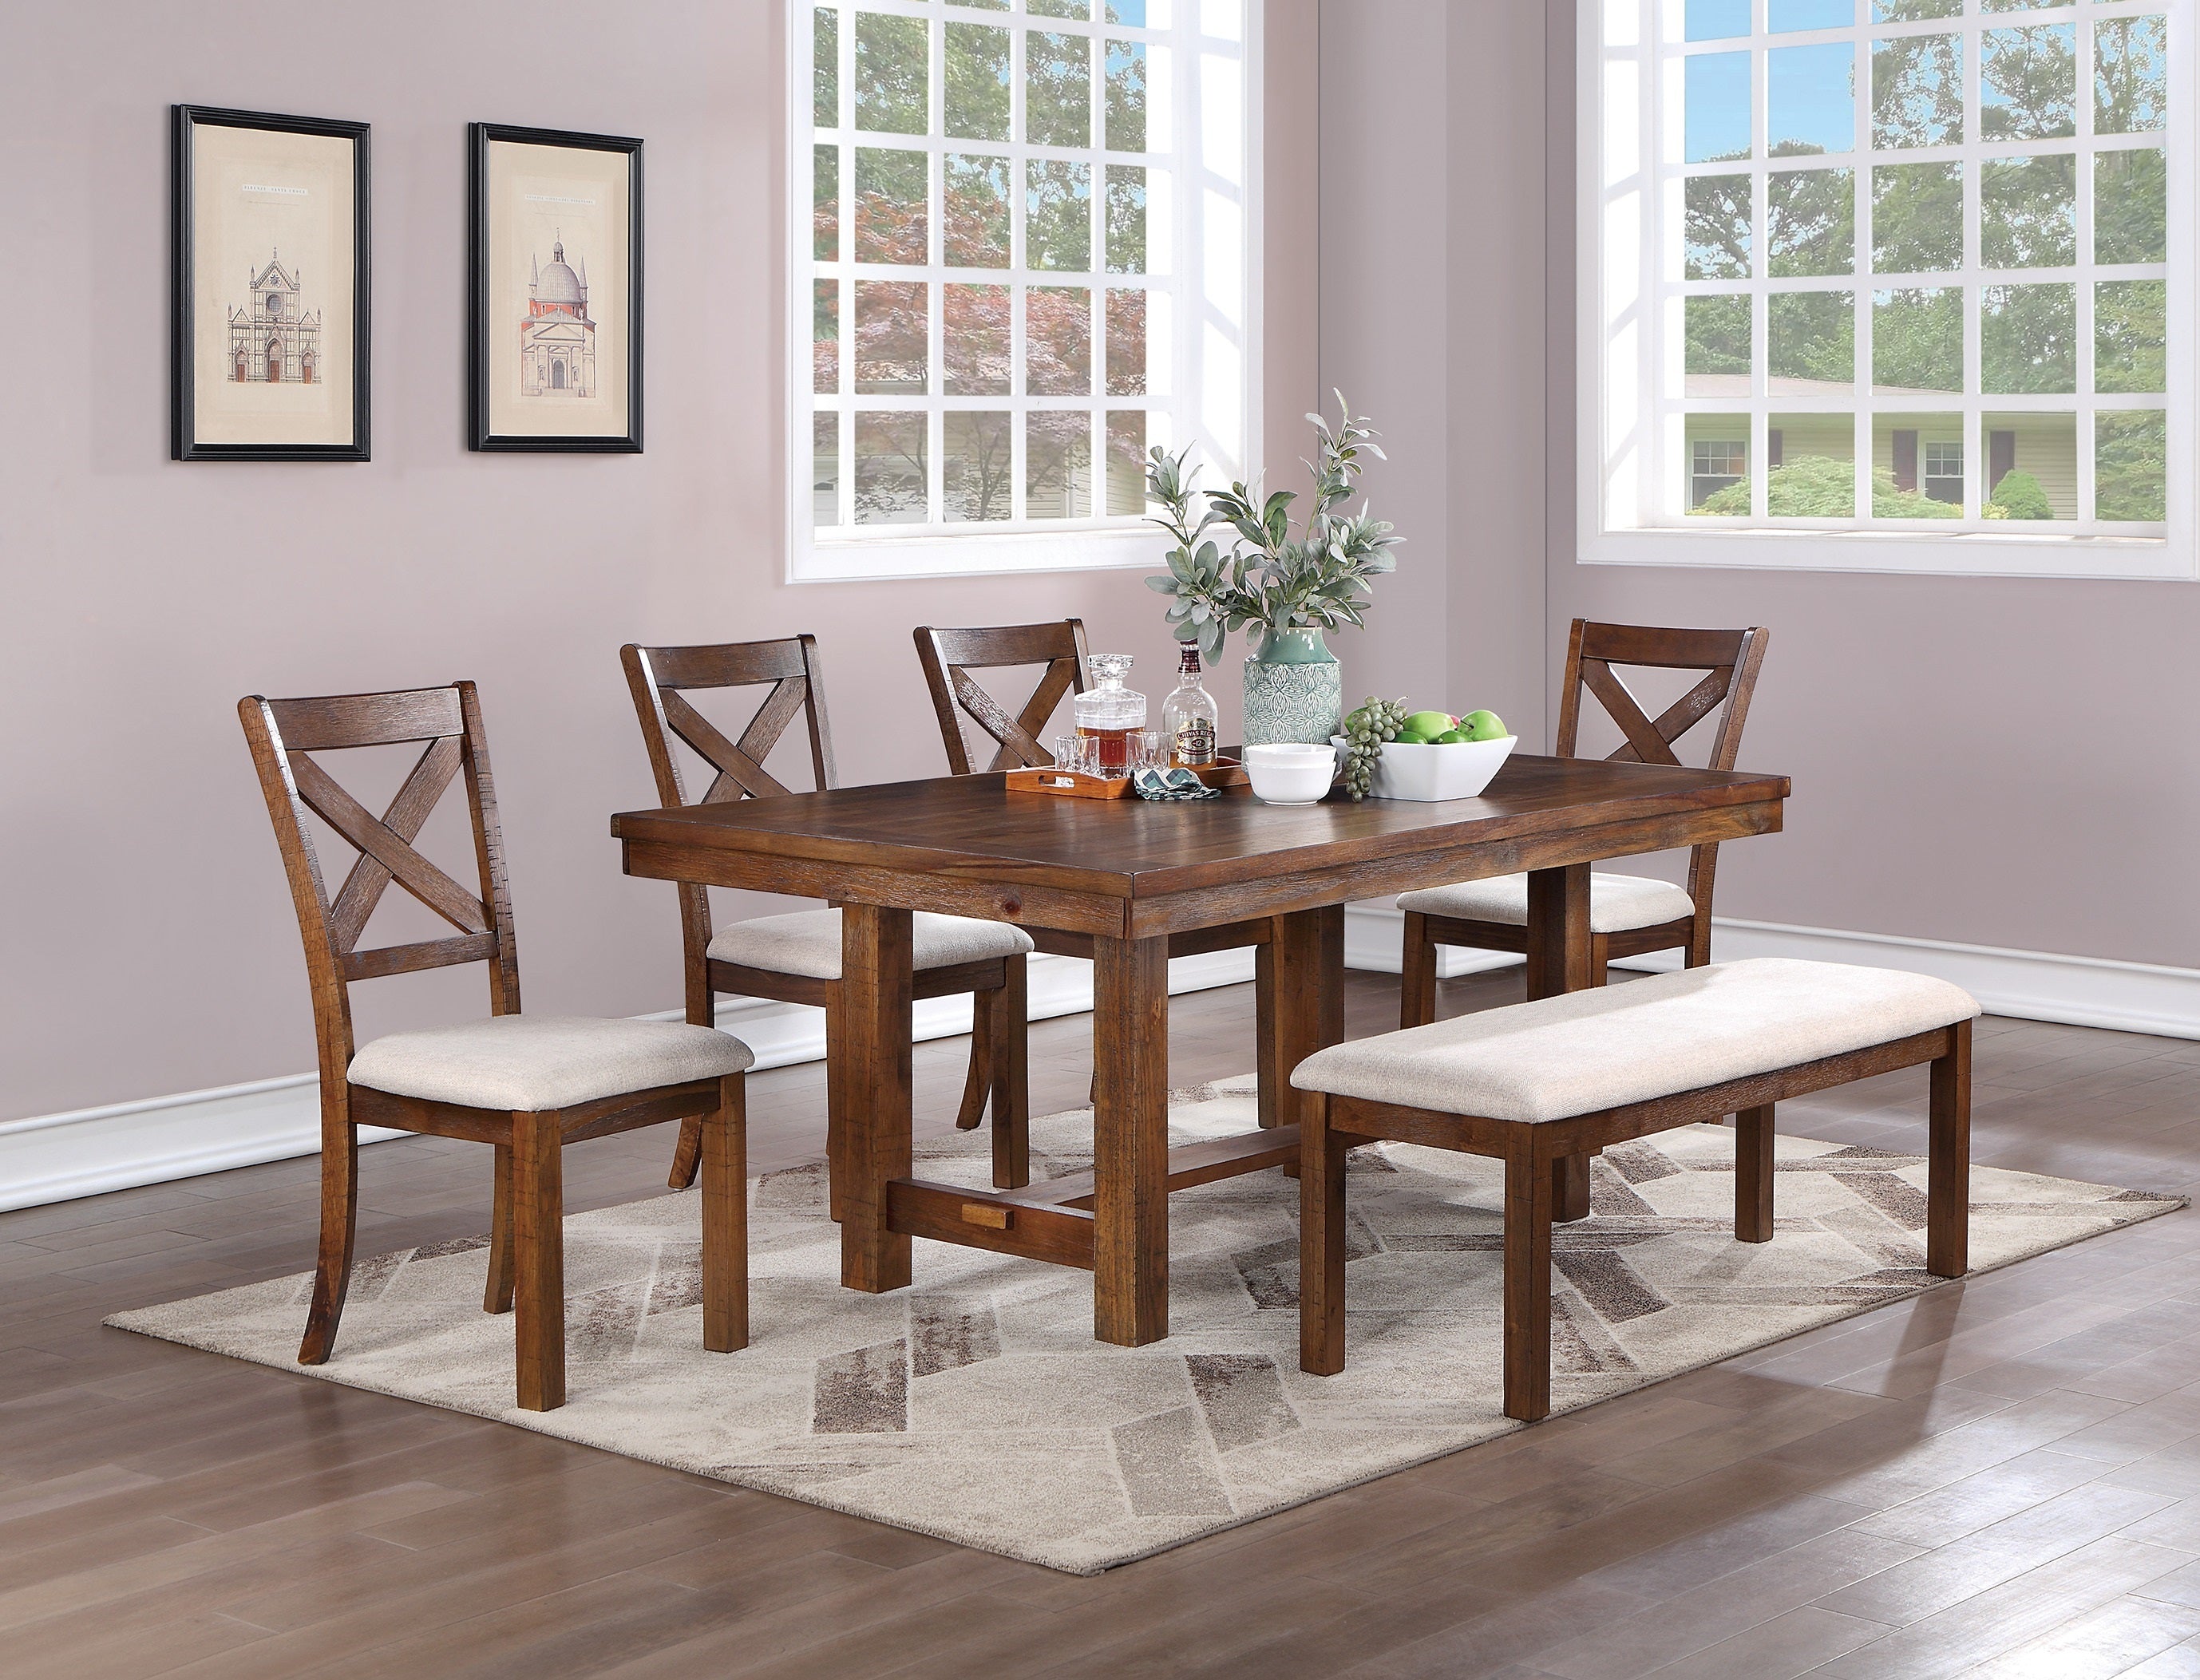 Natural Brown Finish Solid wood 1pc Dining Table Wooden Contemporary Style Kitchen Dining Room Furniture